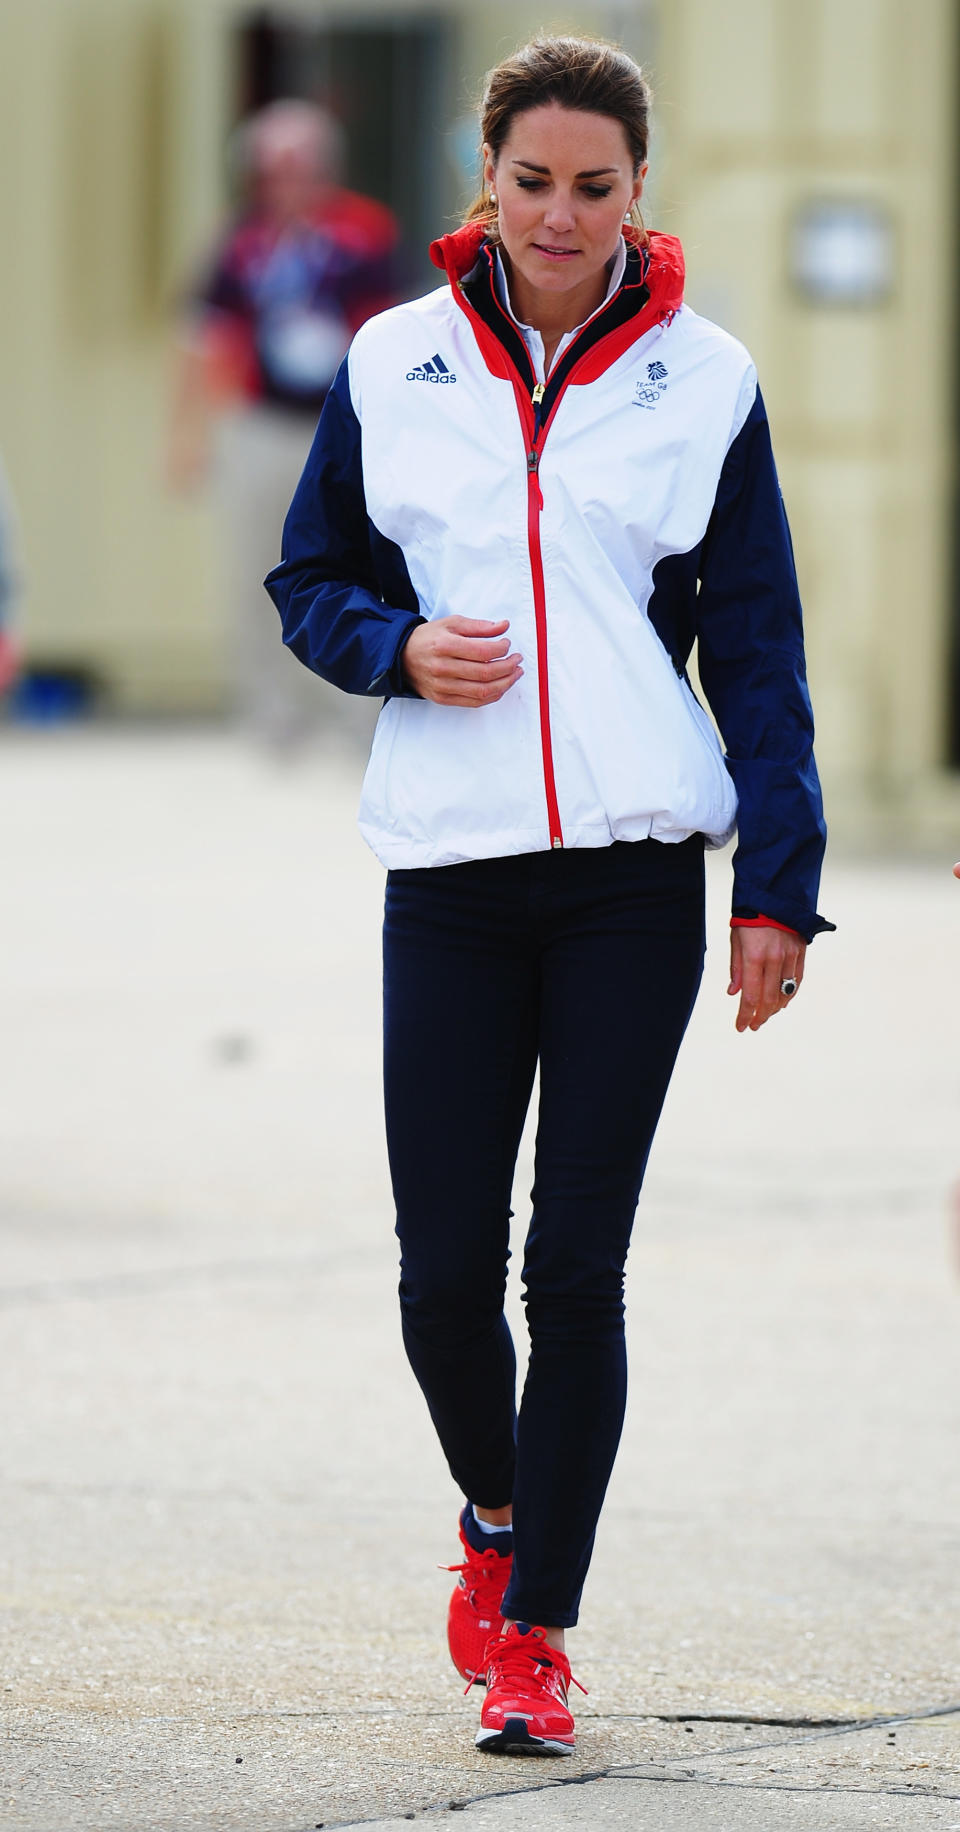 We love the contrast of Kate's over-sized sports jacket with skinny jeans. Her bright red tennis shoes really tie the outfit all together as she walks in the Olympic boat park on August 6.